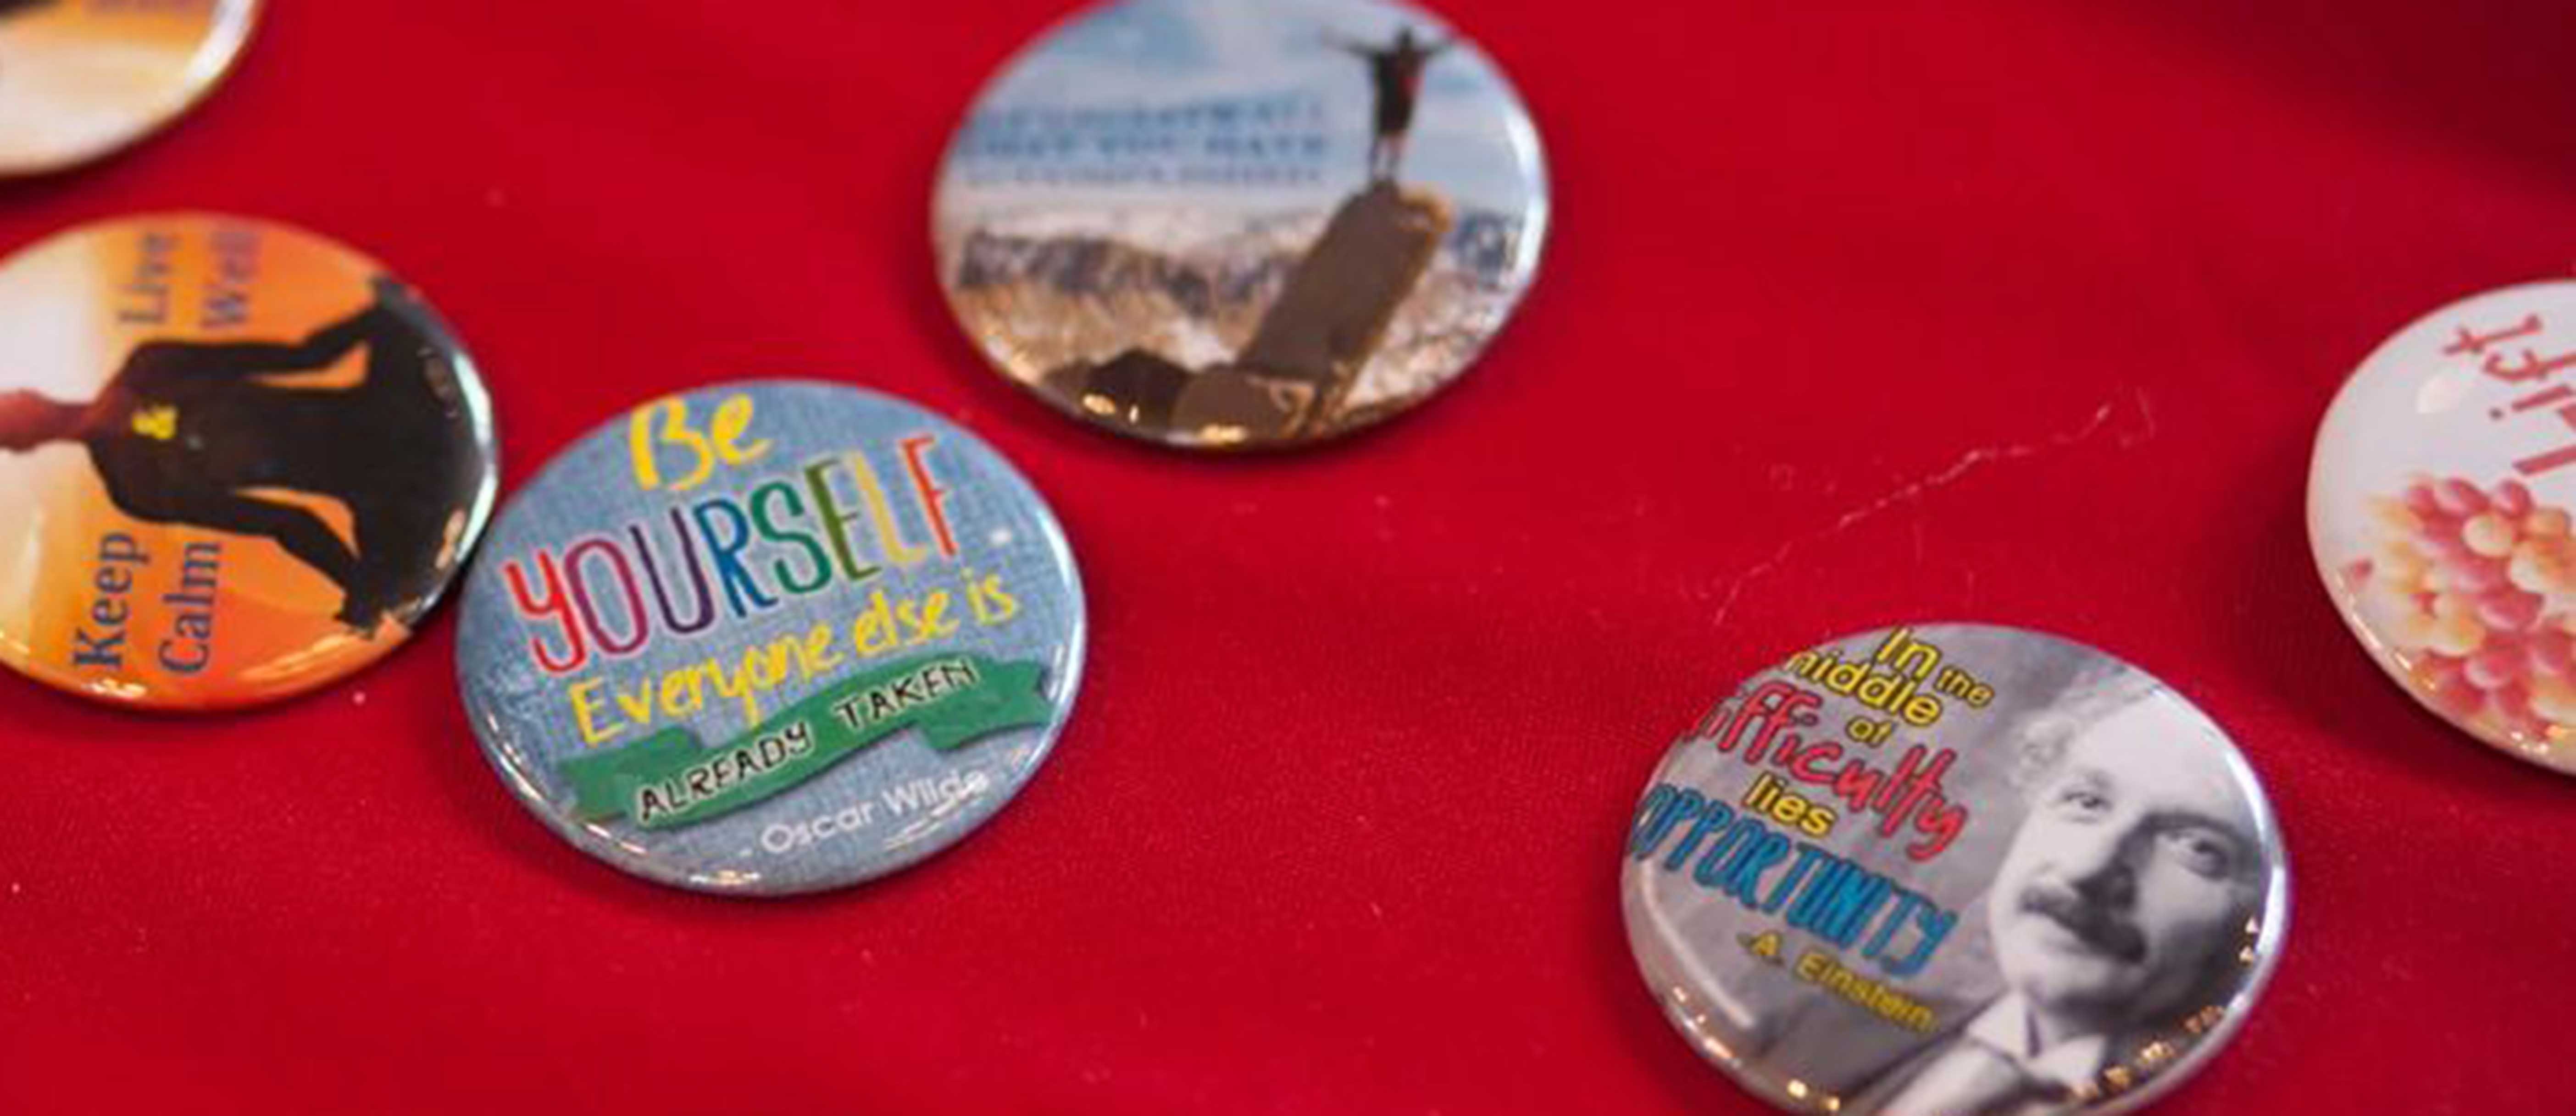 Buttons with inspirational sayings displayed on table at "Cornell Lifted" event